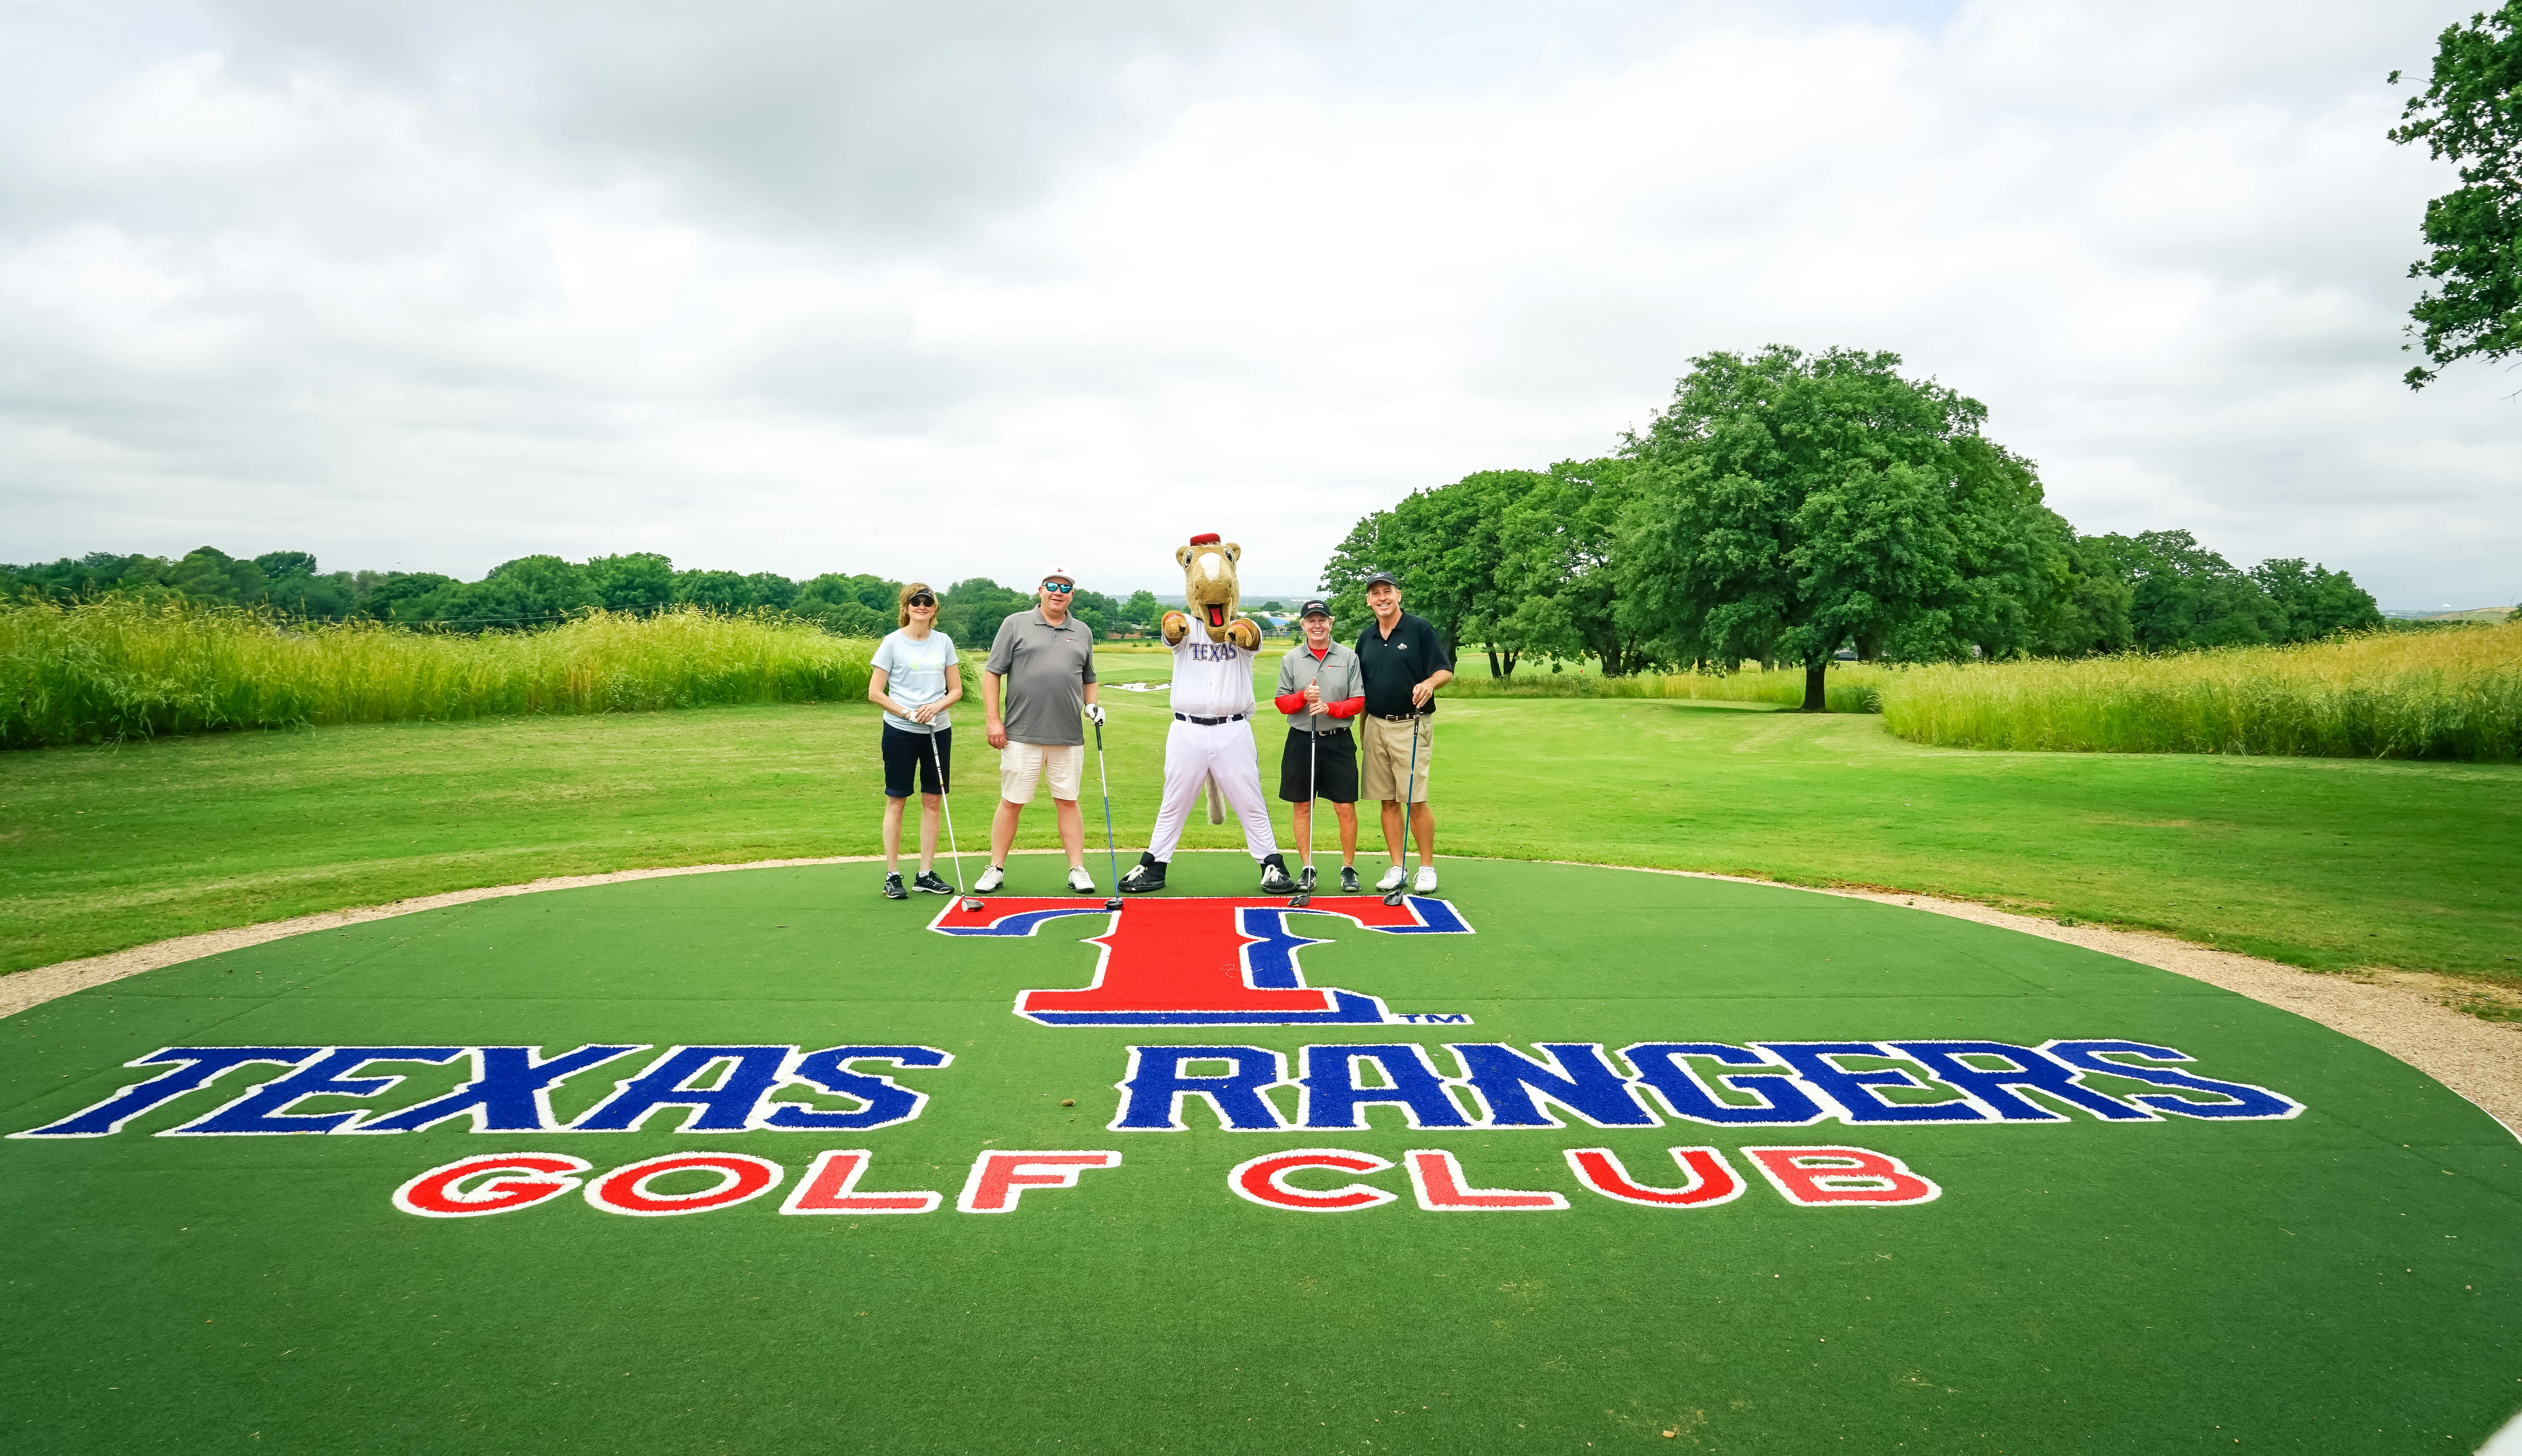 Golf Inc.: Texas Rangers Golf Club Named Second Place for Renovation of the Year cover image